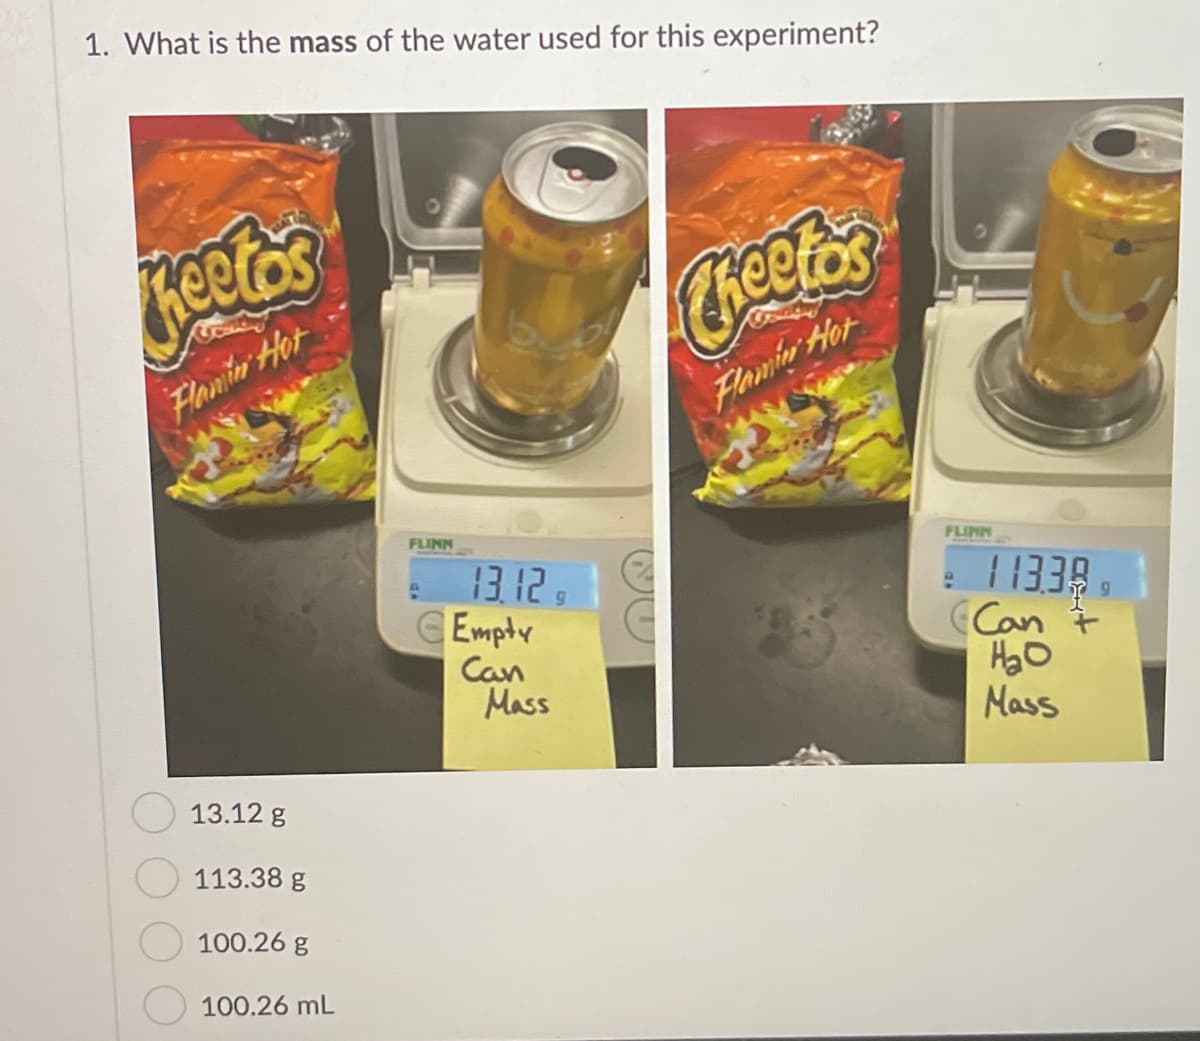 1. What is the mass of the water used for this experiment?
Creeto
Flanin Hot
Flamin Hot
FLINN
FLINN
13.12 9
CEmpty
Can
Mass
11338
Can 7
Mass
13.12 g
113.38 g
100.26 g
100.26 mL
